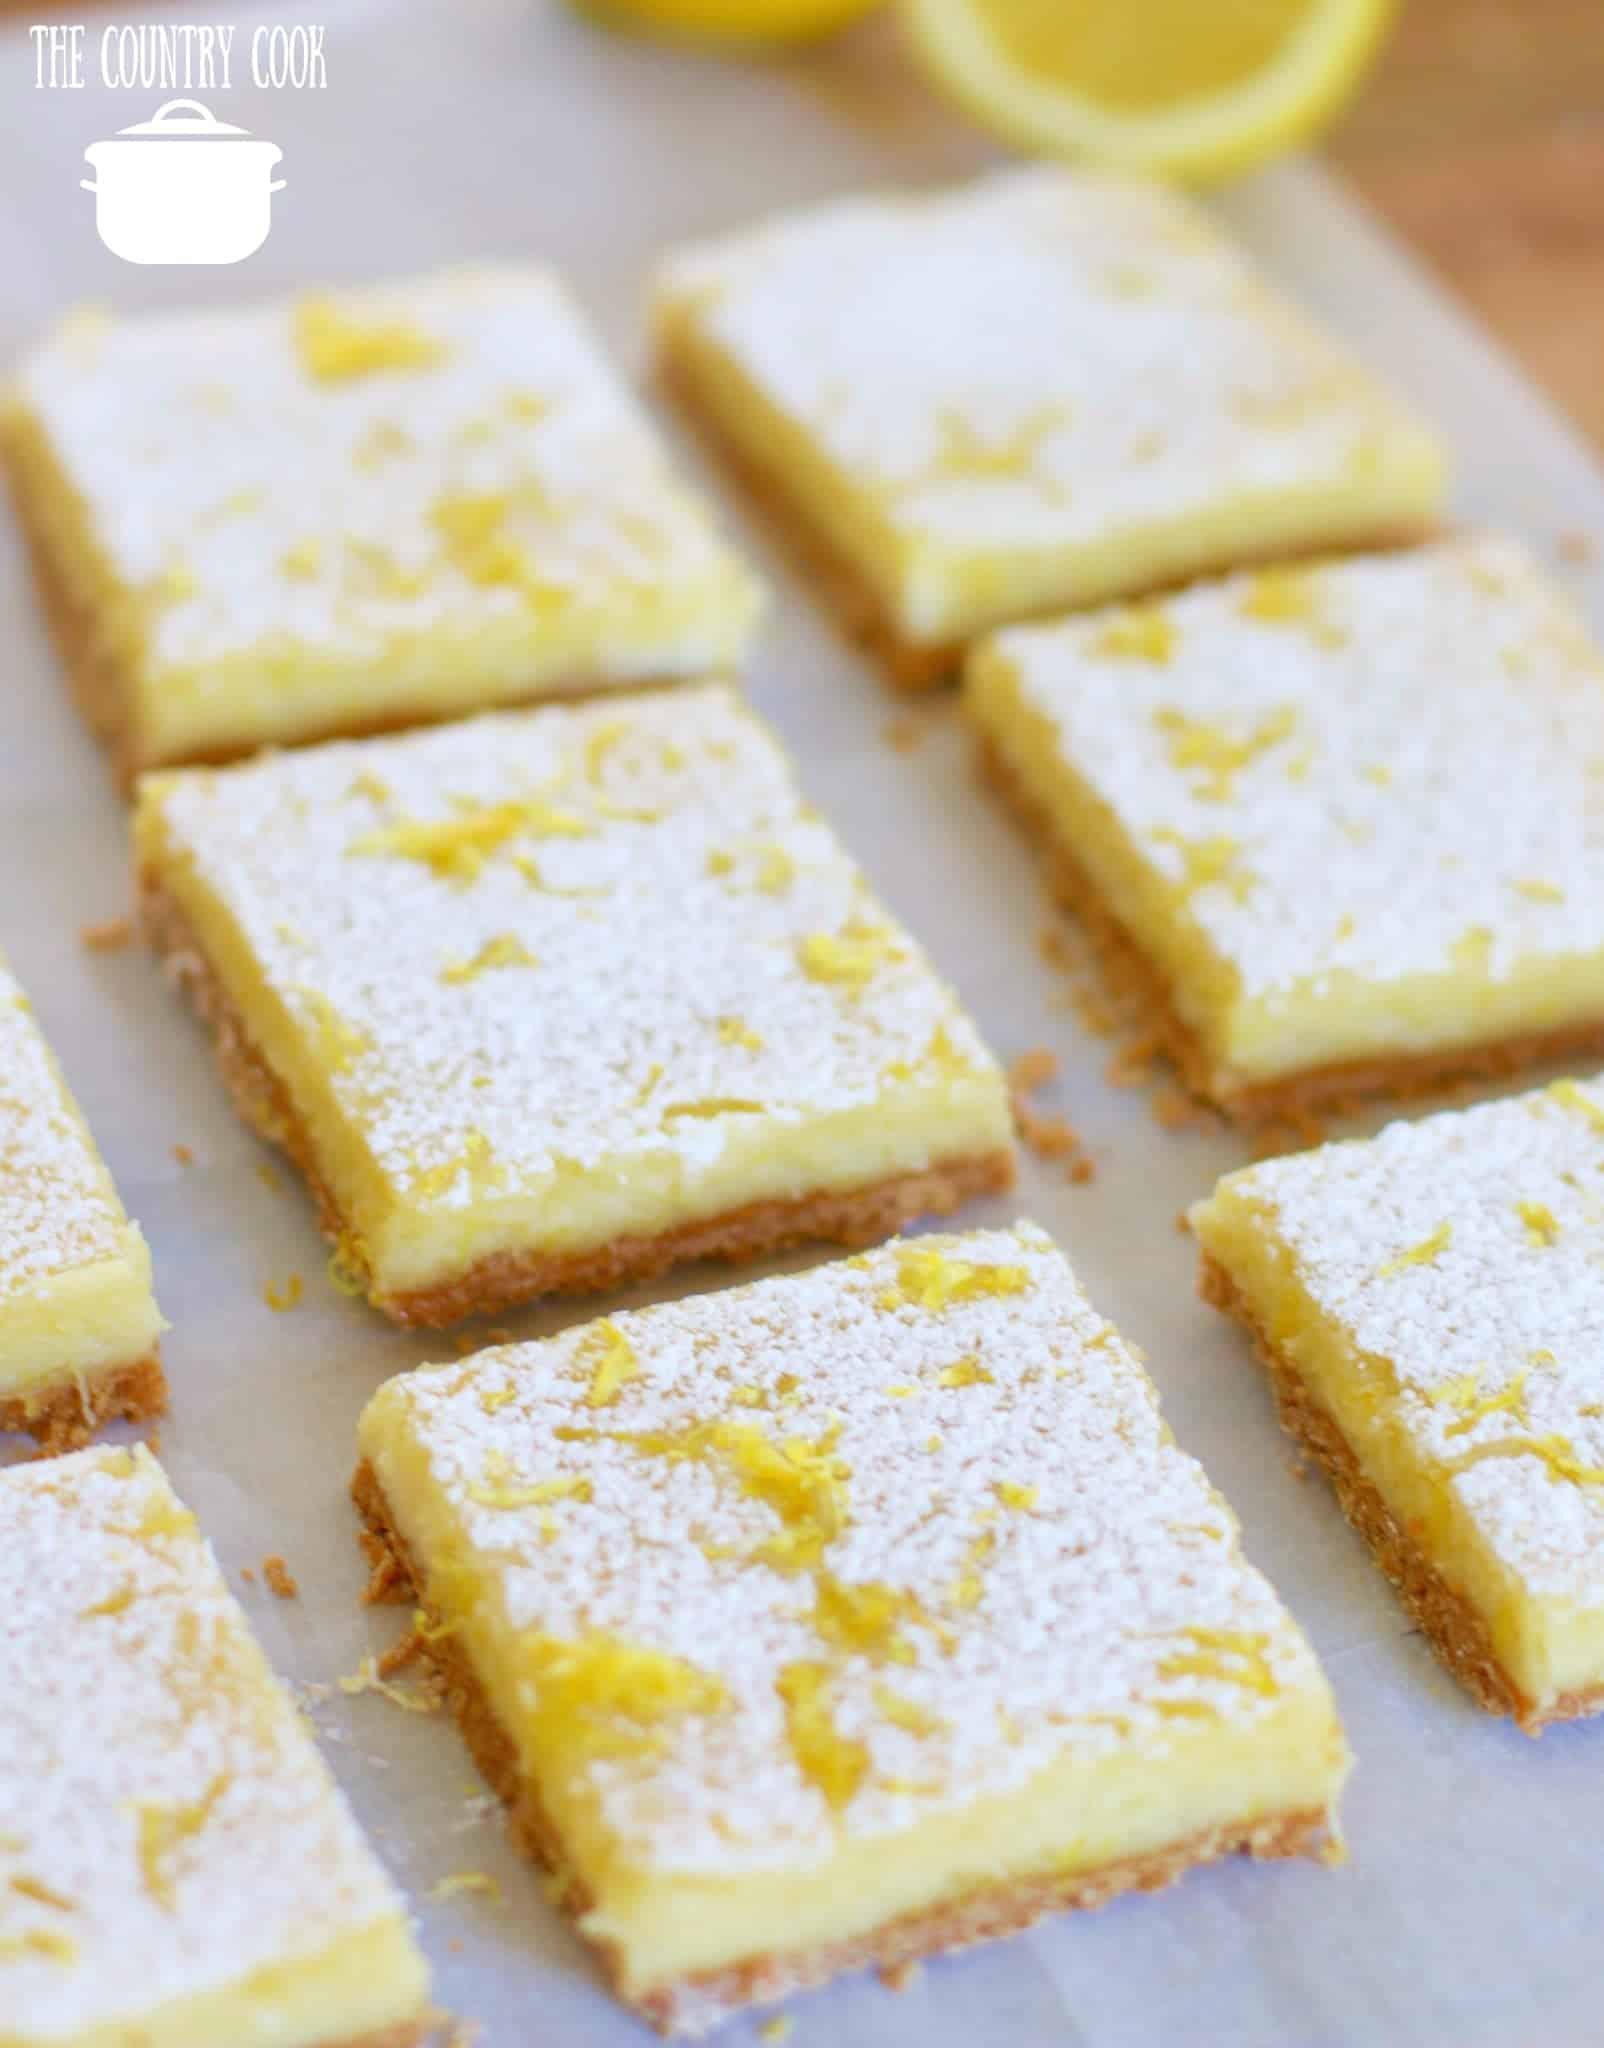 Cream Cheese Lemon Bars with vanilla wafers topped with powdered sugar.